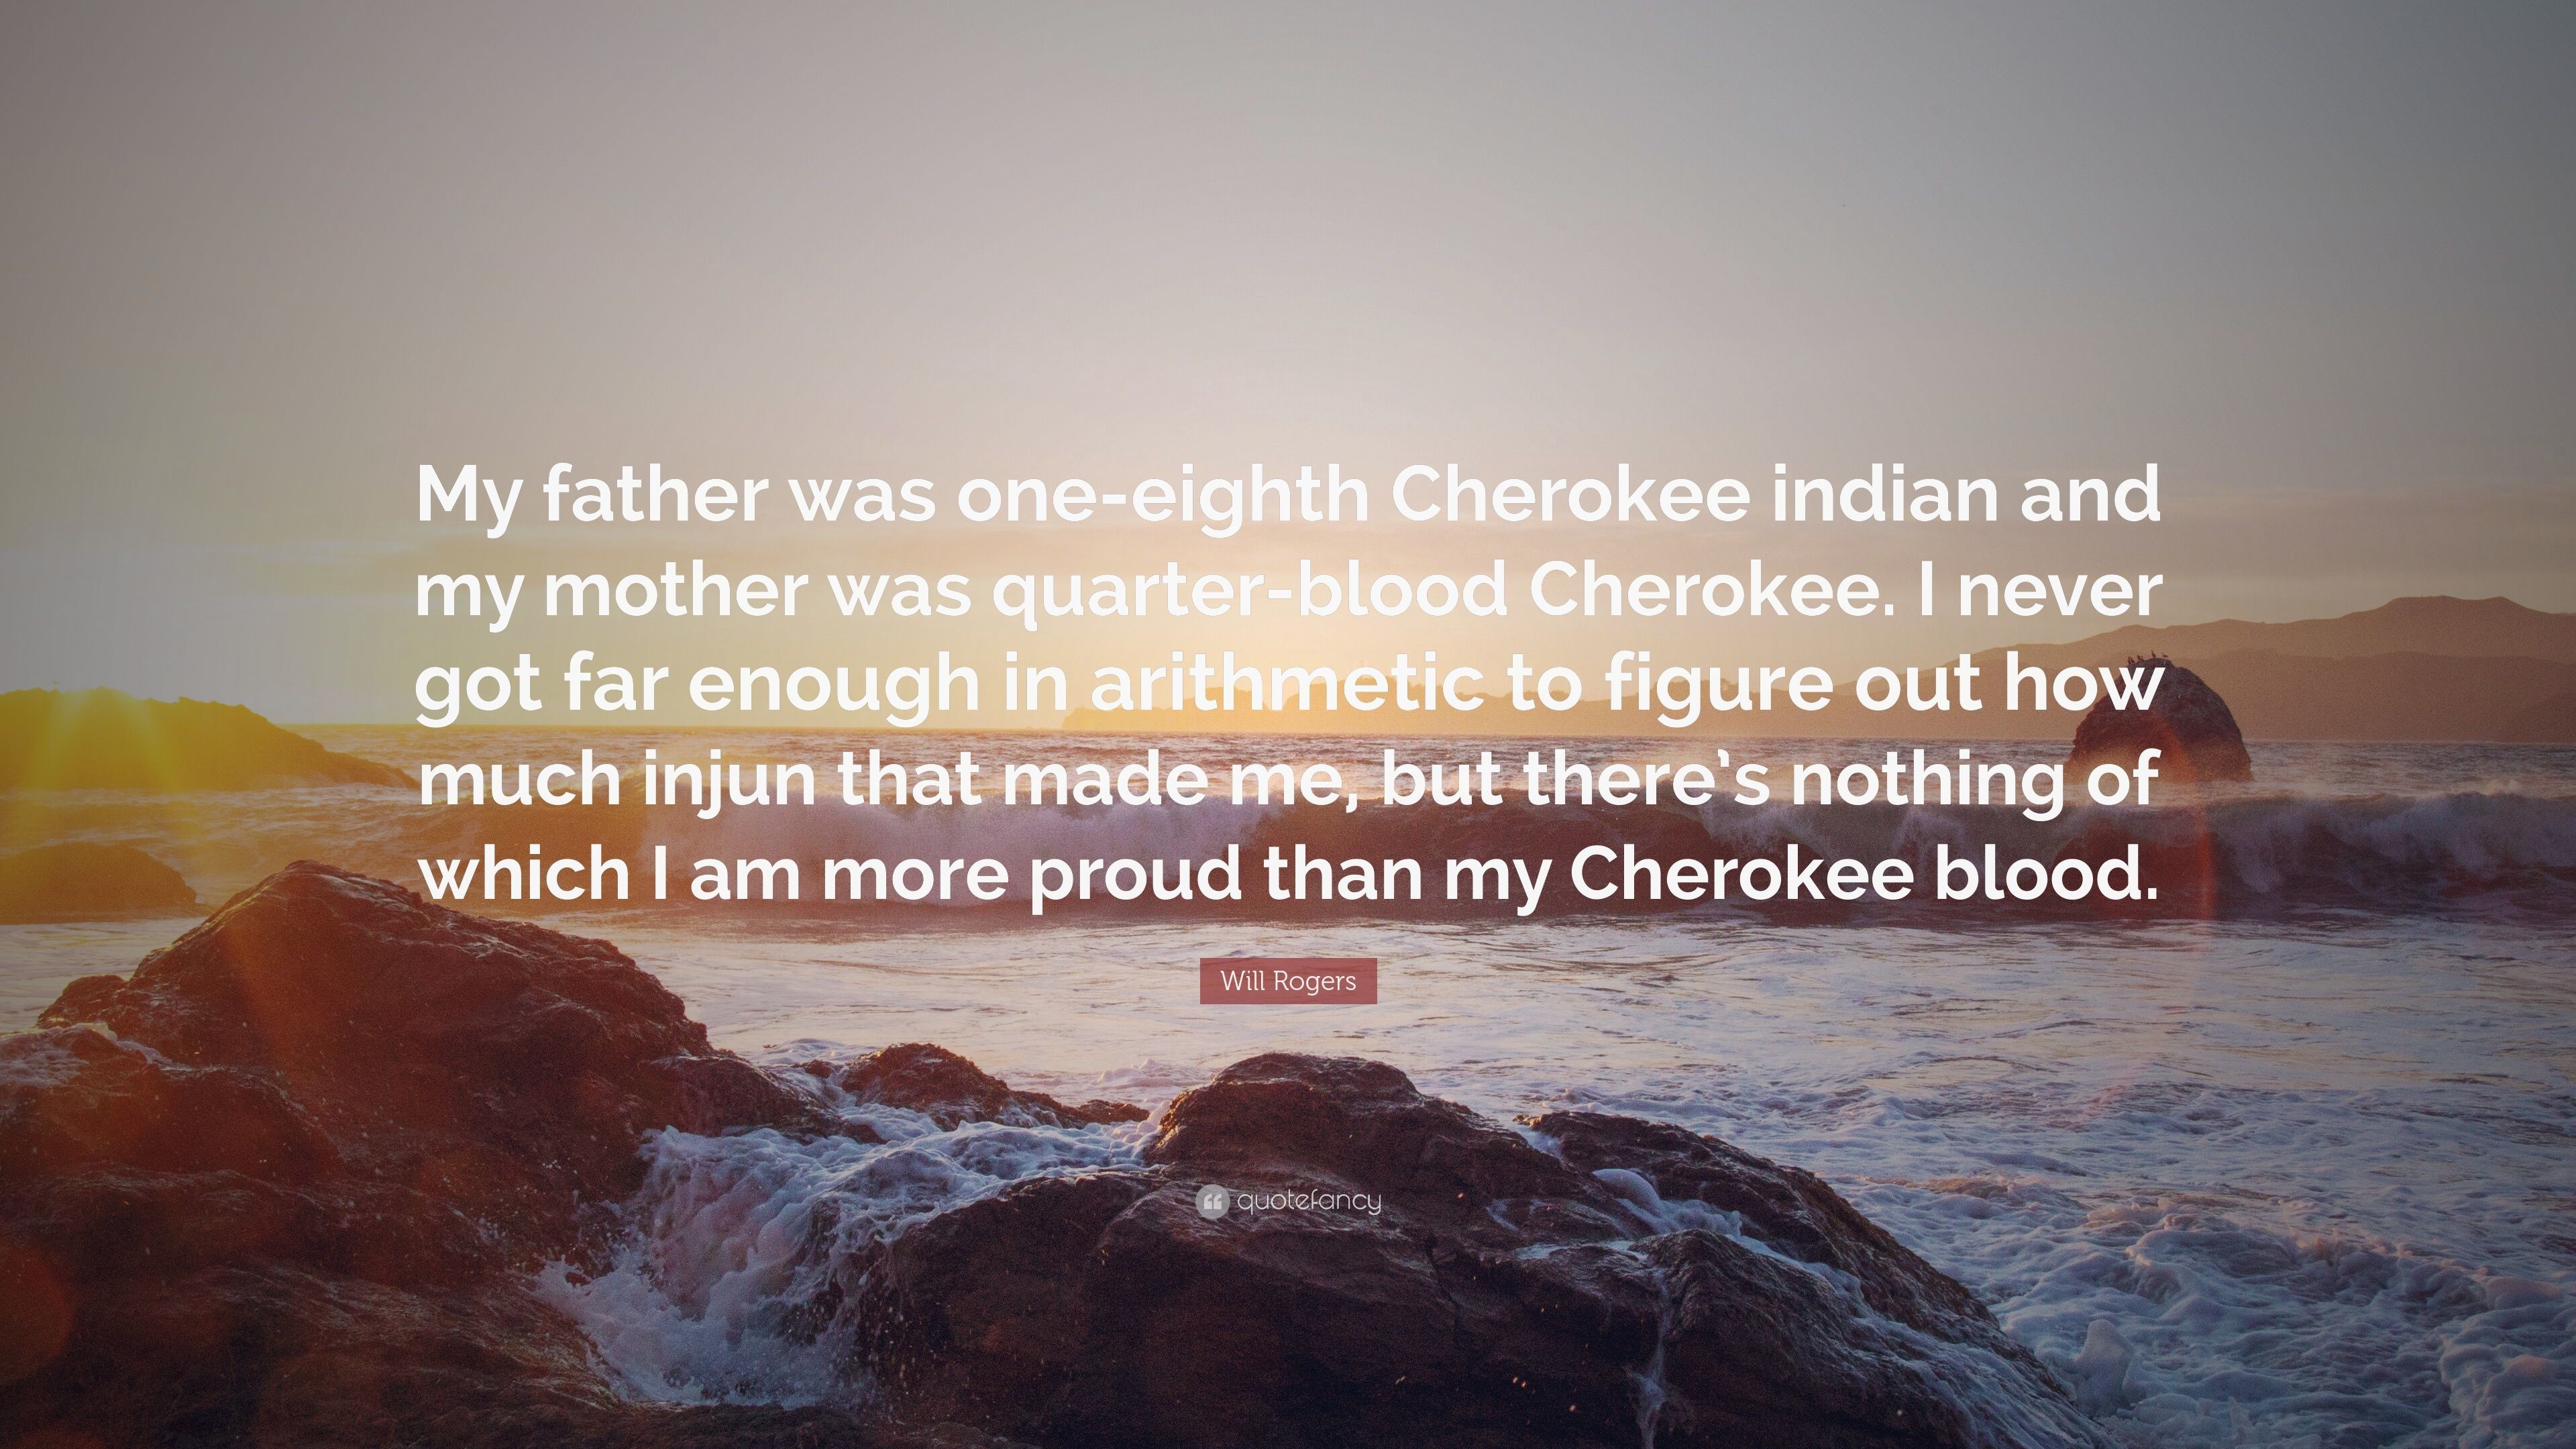 Will Rogers Quote My father was one eighth Cherokee indian and my mother